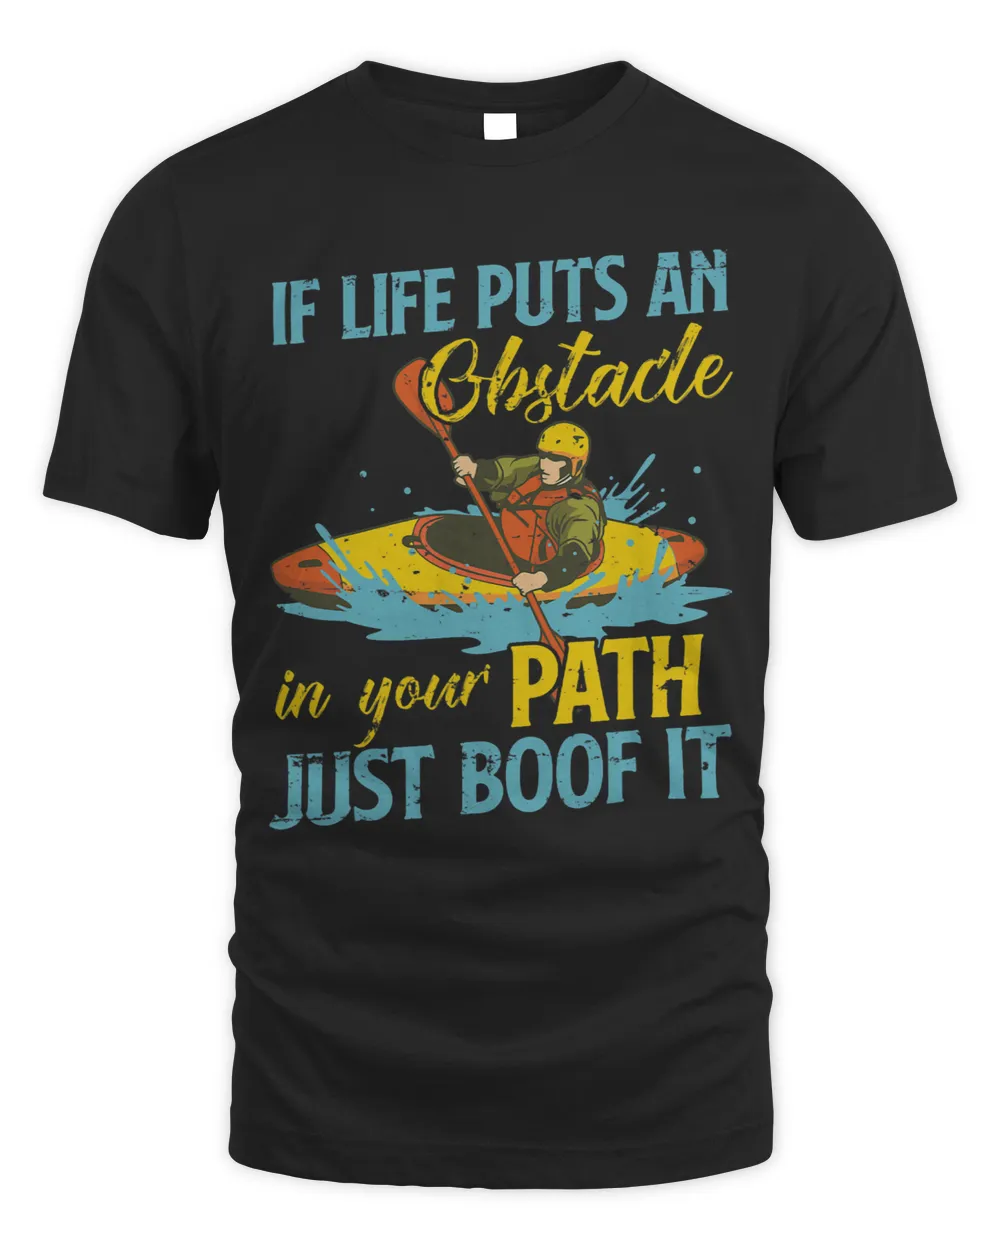 If life puts an obstacle in your path just boof it